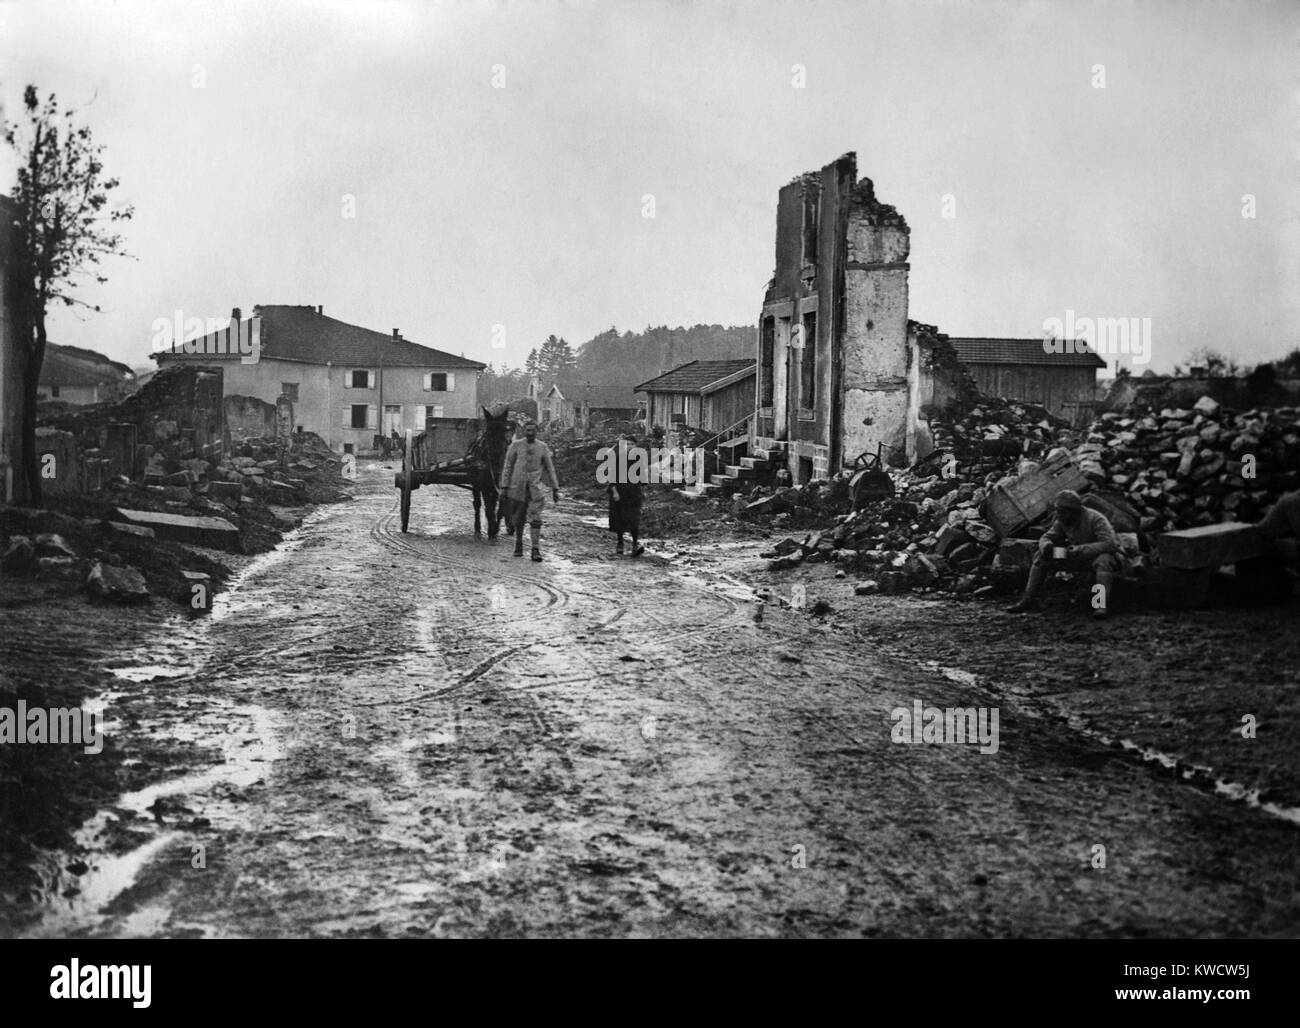 World War 1. A French couple lead their horse and wagon through the ruins of the village of Albert. The German army captured and looted the town in March 1918 during the Spring Offensive. Photo possibly taken after August 1918 when the British reoccupied Albert. (BSLOC 2013 1 178) Stock Photo